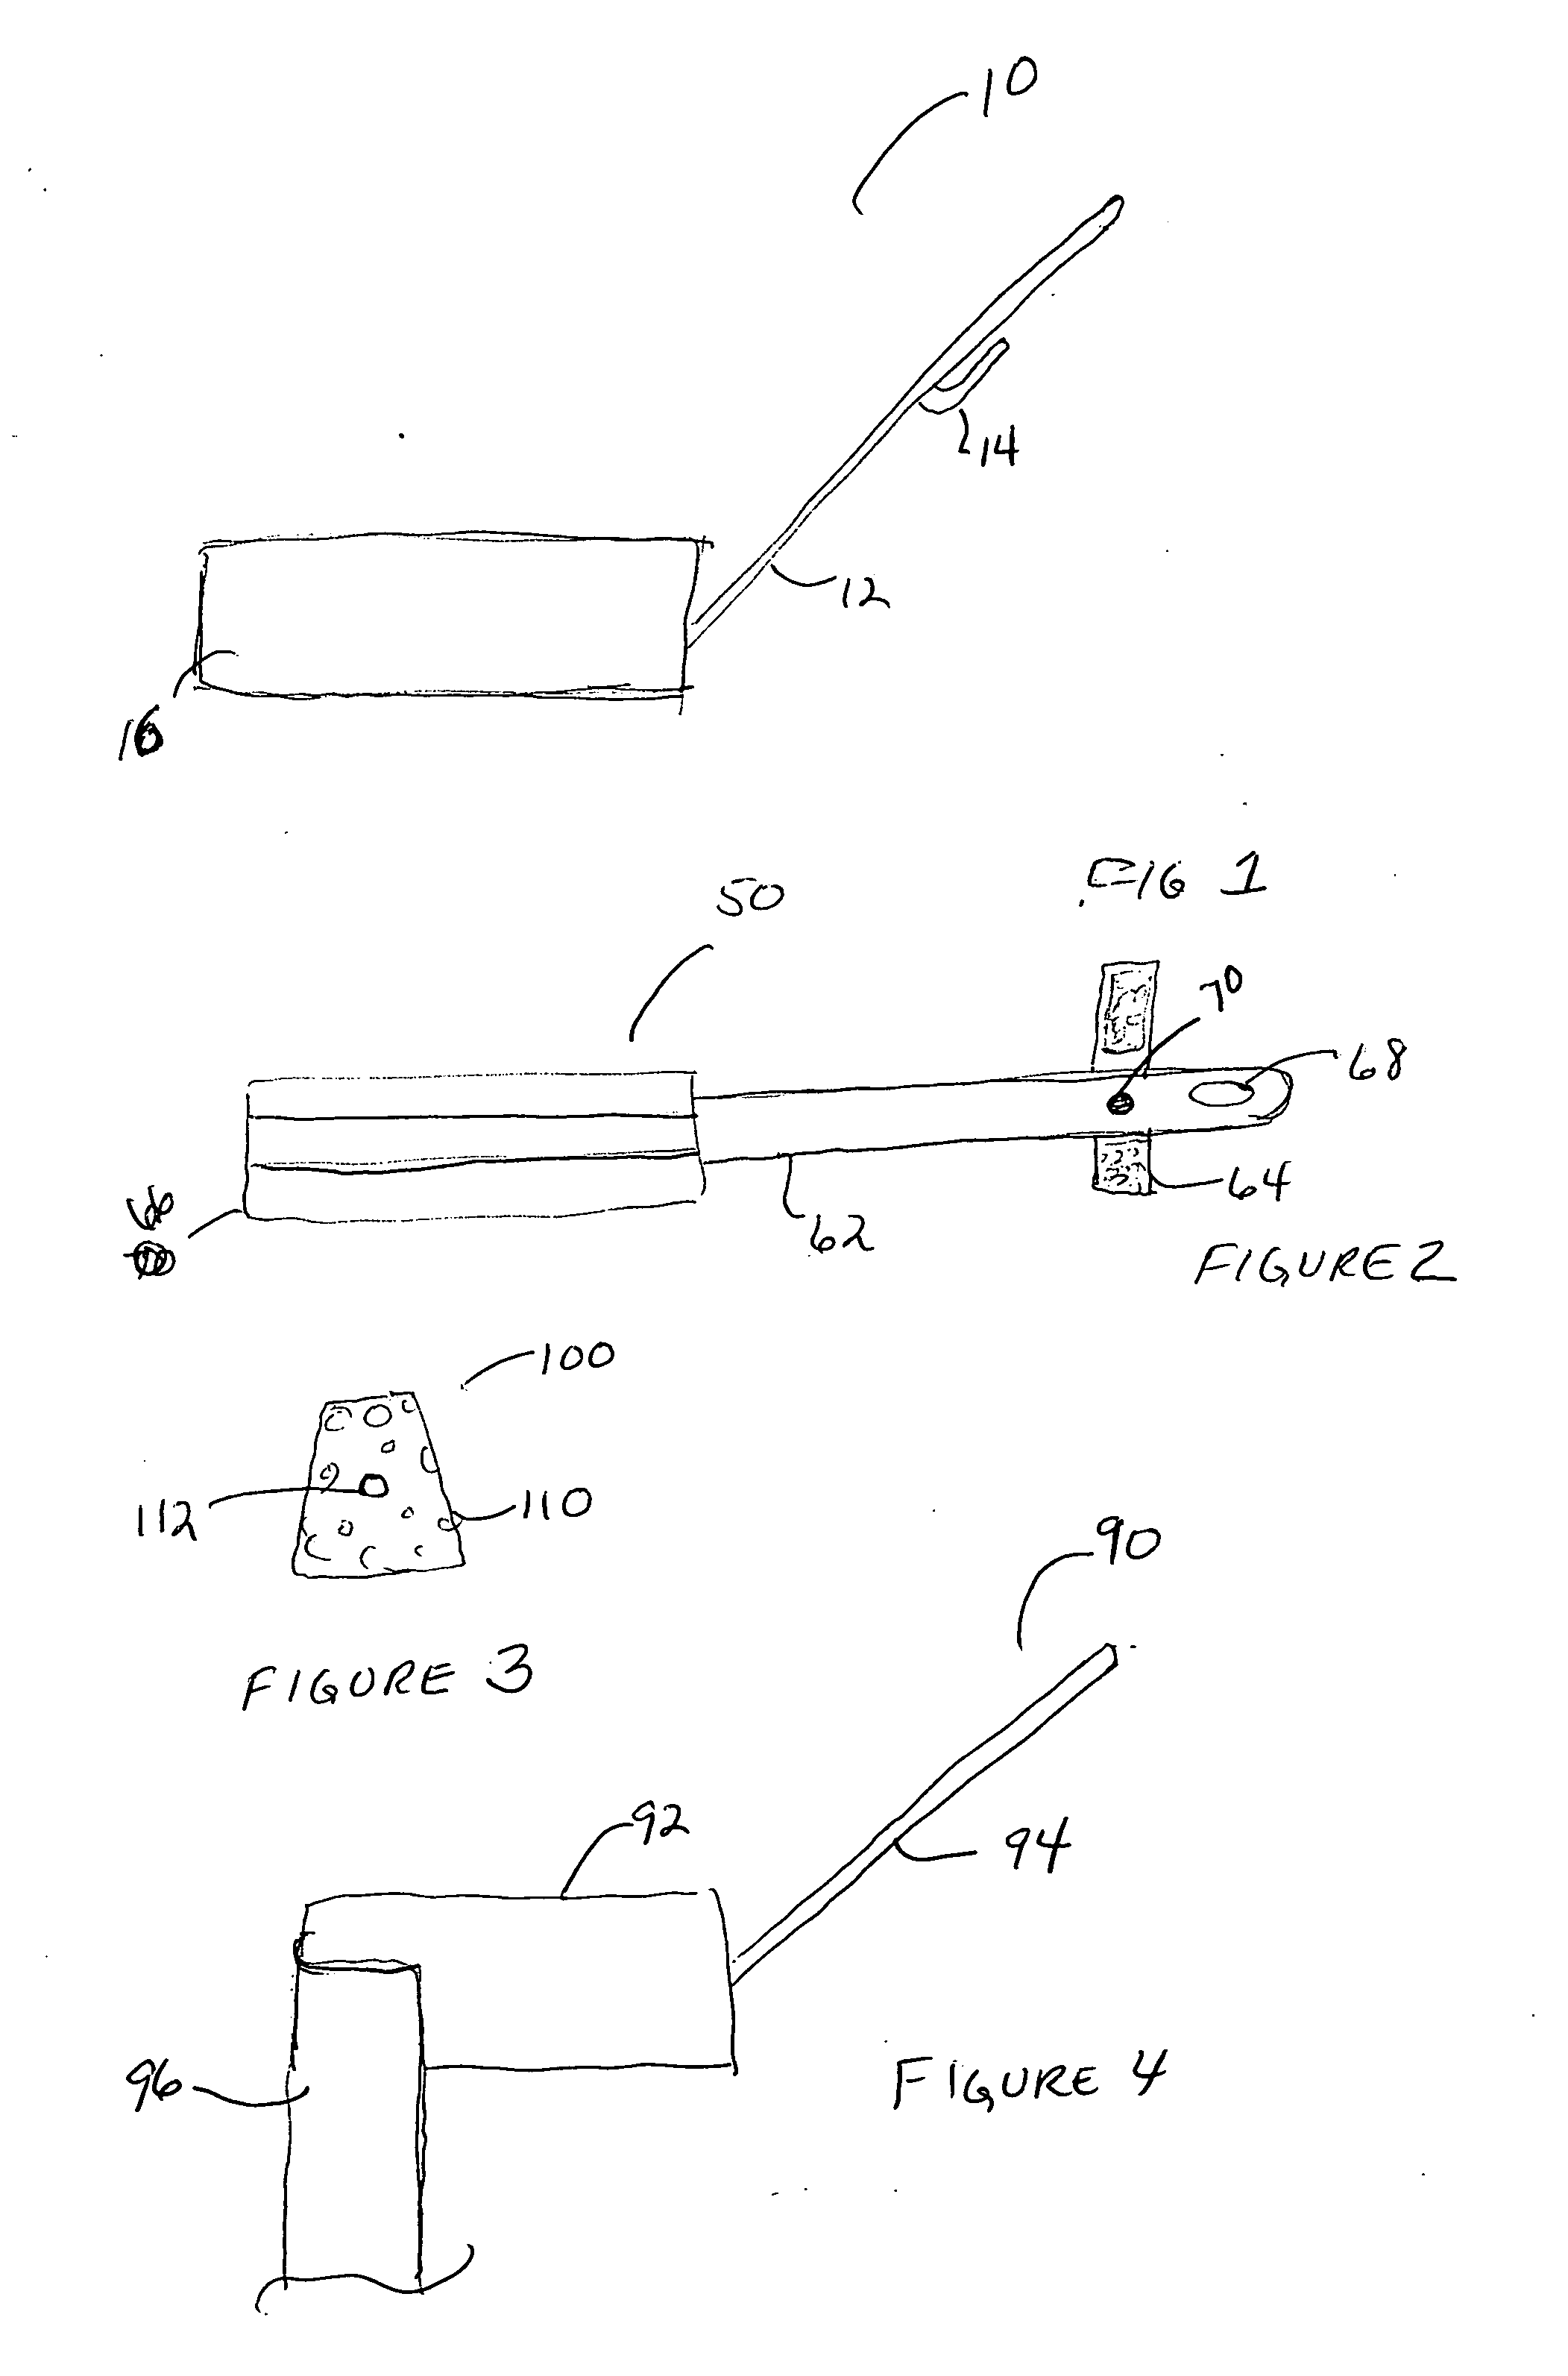 Personal hygiene wiping and scrubbing device and method for using the device